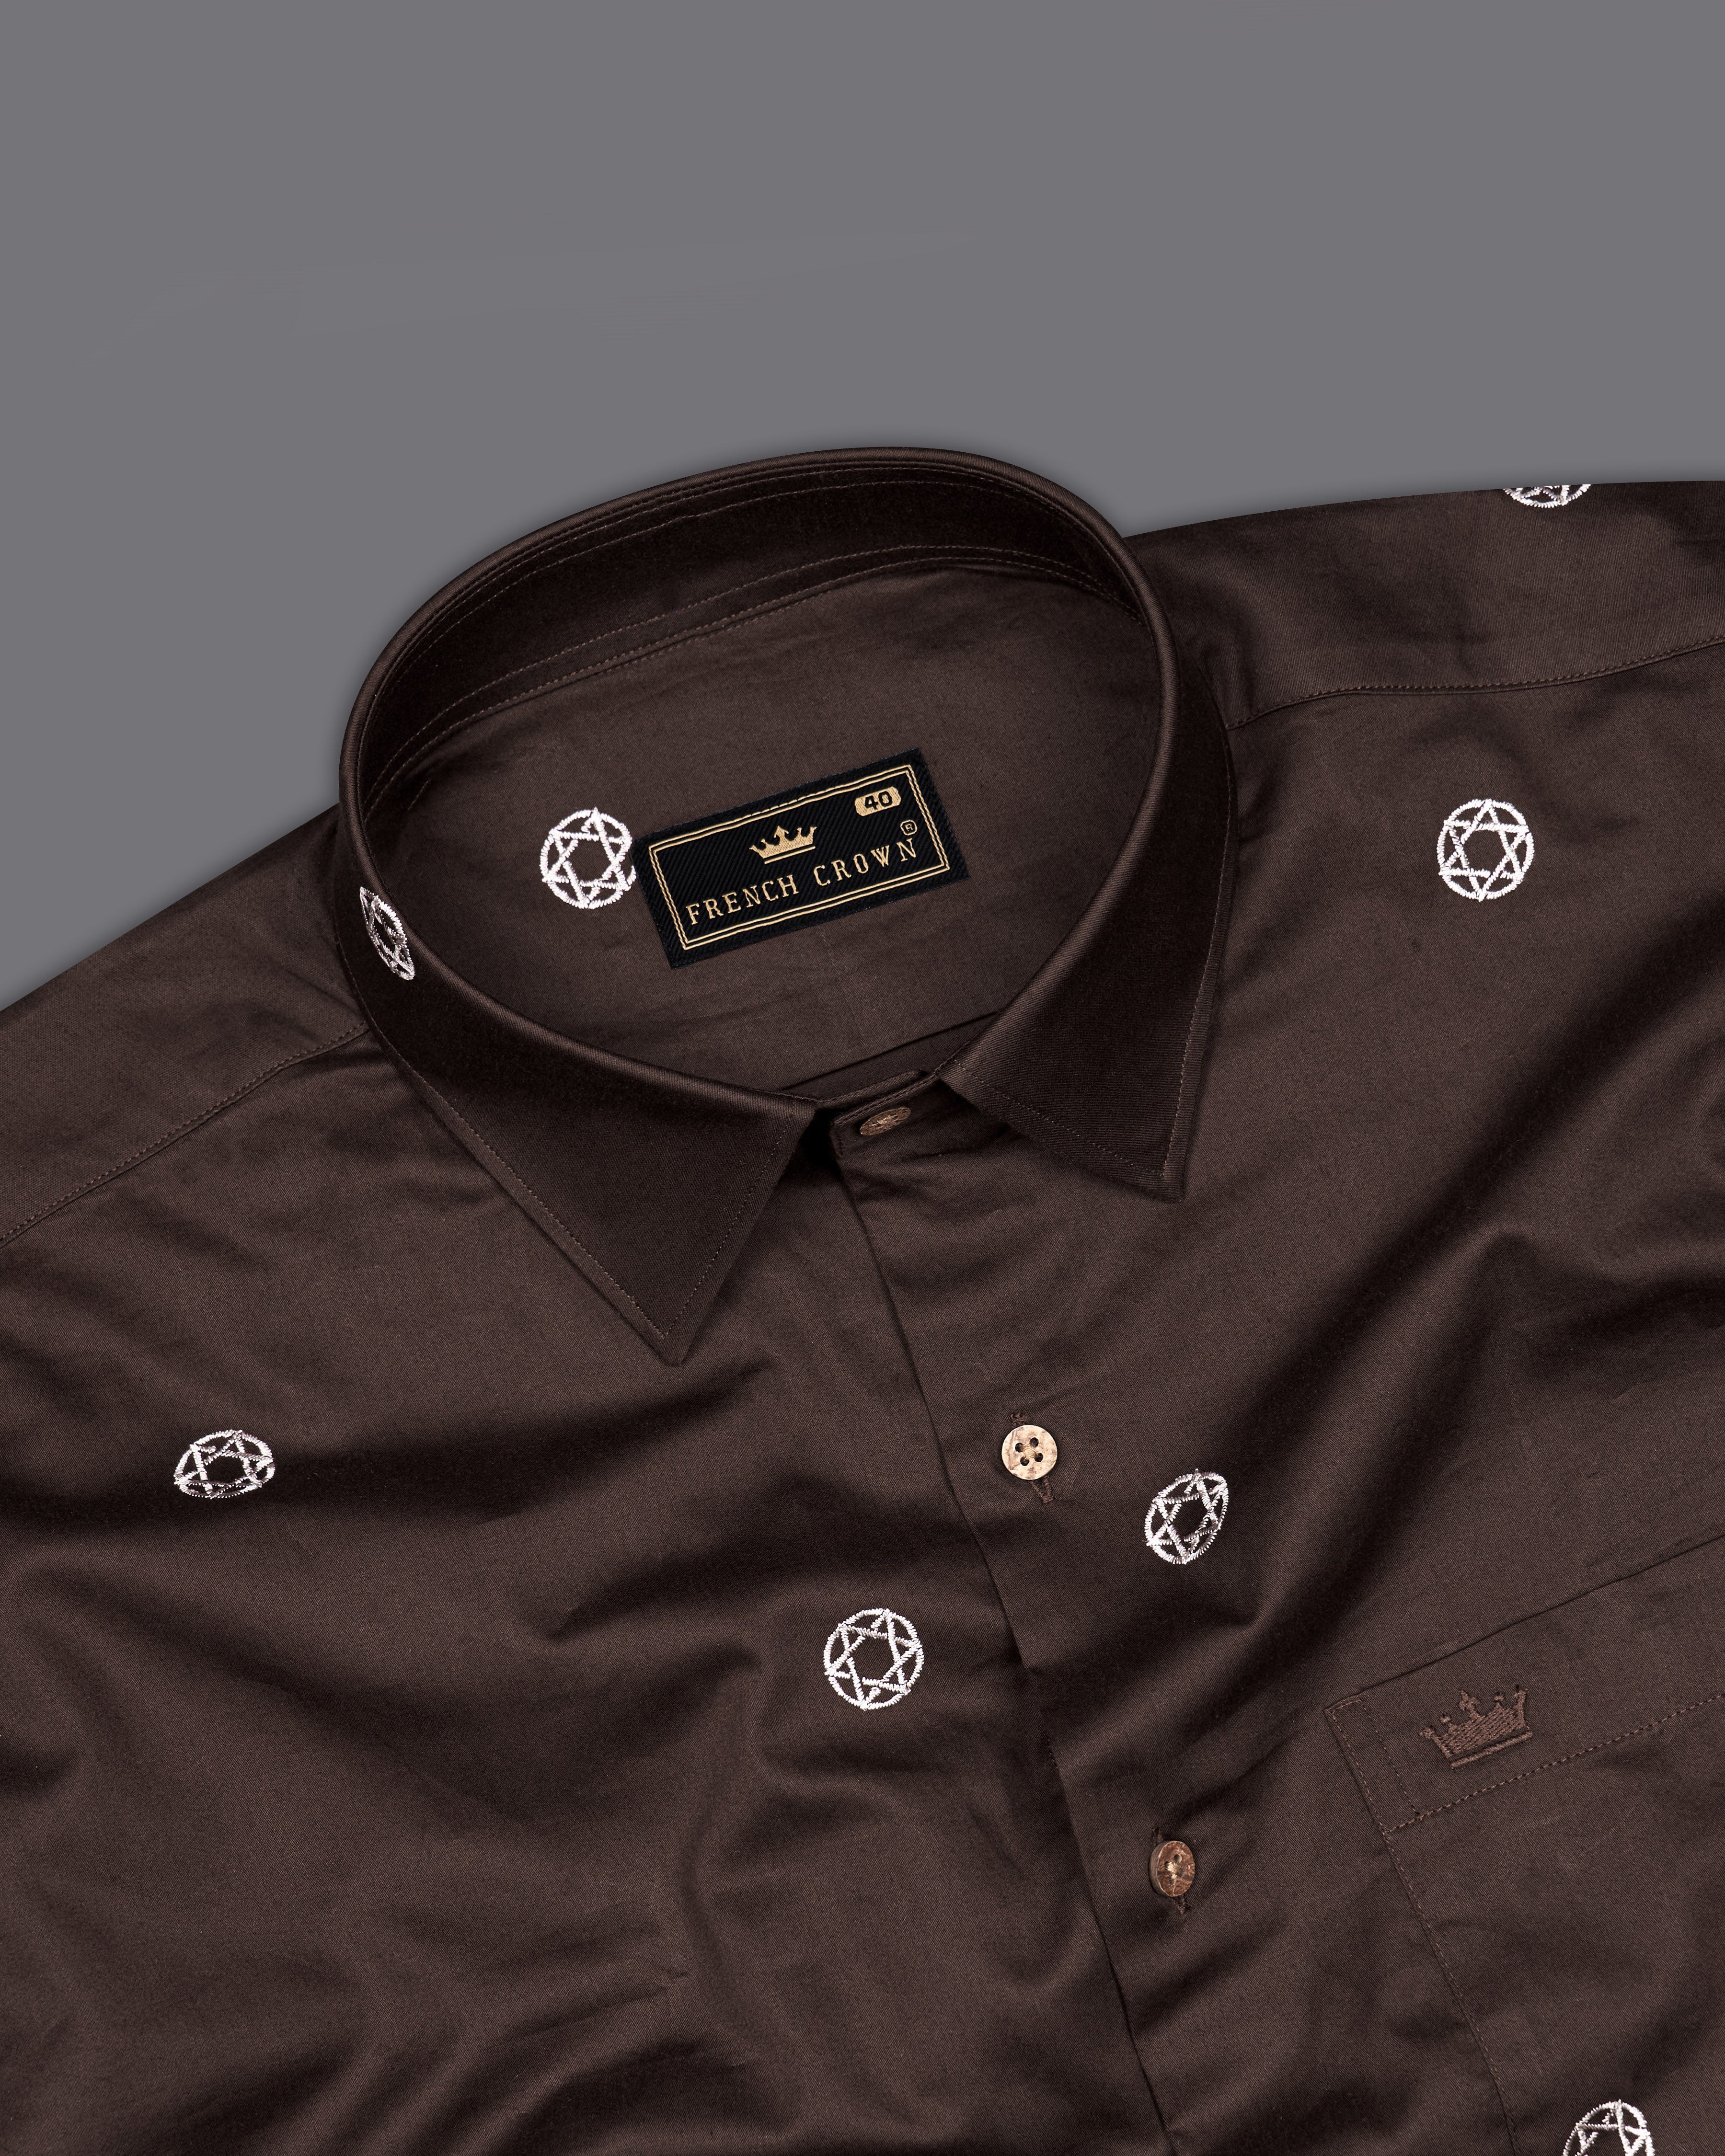 Woody Brown Embroidered Super Soft Premium Cotton Shirt  9711-CB-38, 9711-CB-H-38, 9711-CB-39, 9711-CB-H-39, 9711-CB-40, 9711-CB-H-40, 9711-CB-42, 9711-CB-H-42, 9711-CB-44, 9711-CB-H-44, 9711-CB-46, 9711-CB-H-46, 9711-CB-48, 9711-CB-H-48, 9711-CB-50, 9711-CB-H-50, 9711-CB-52, 9711-CB-H-52